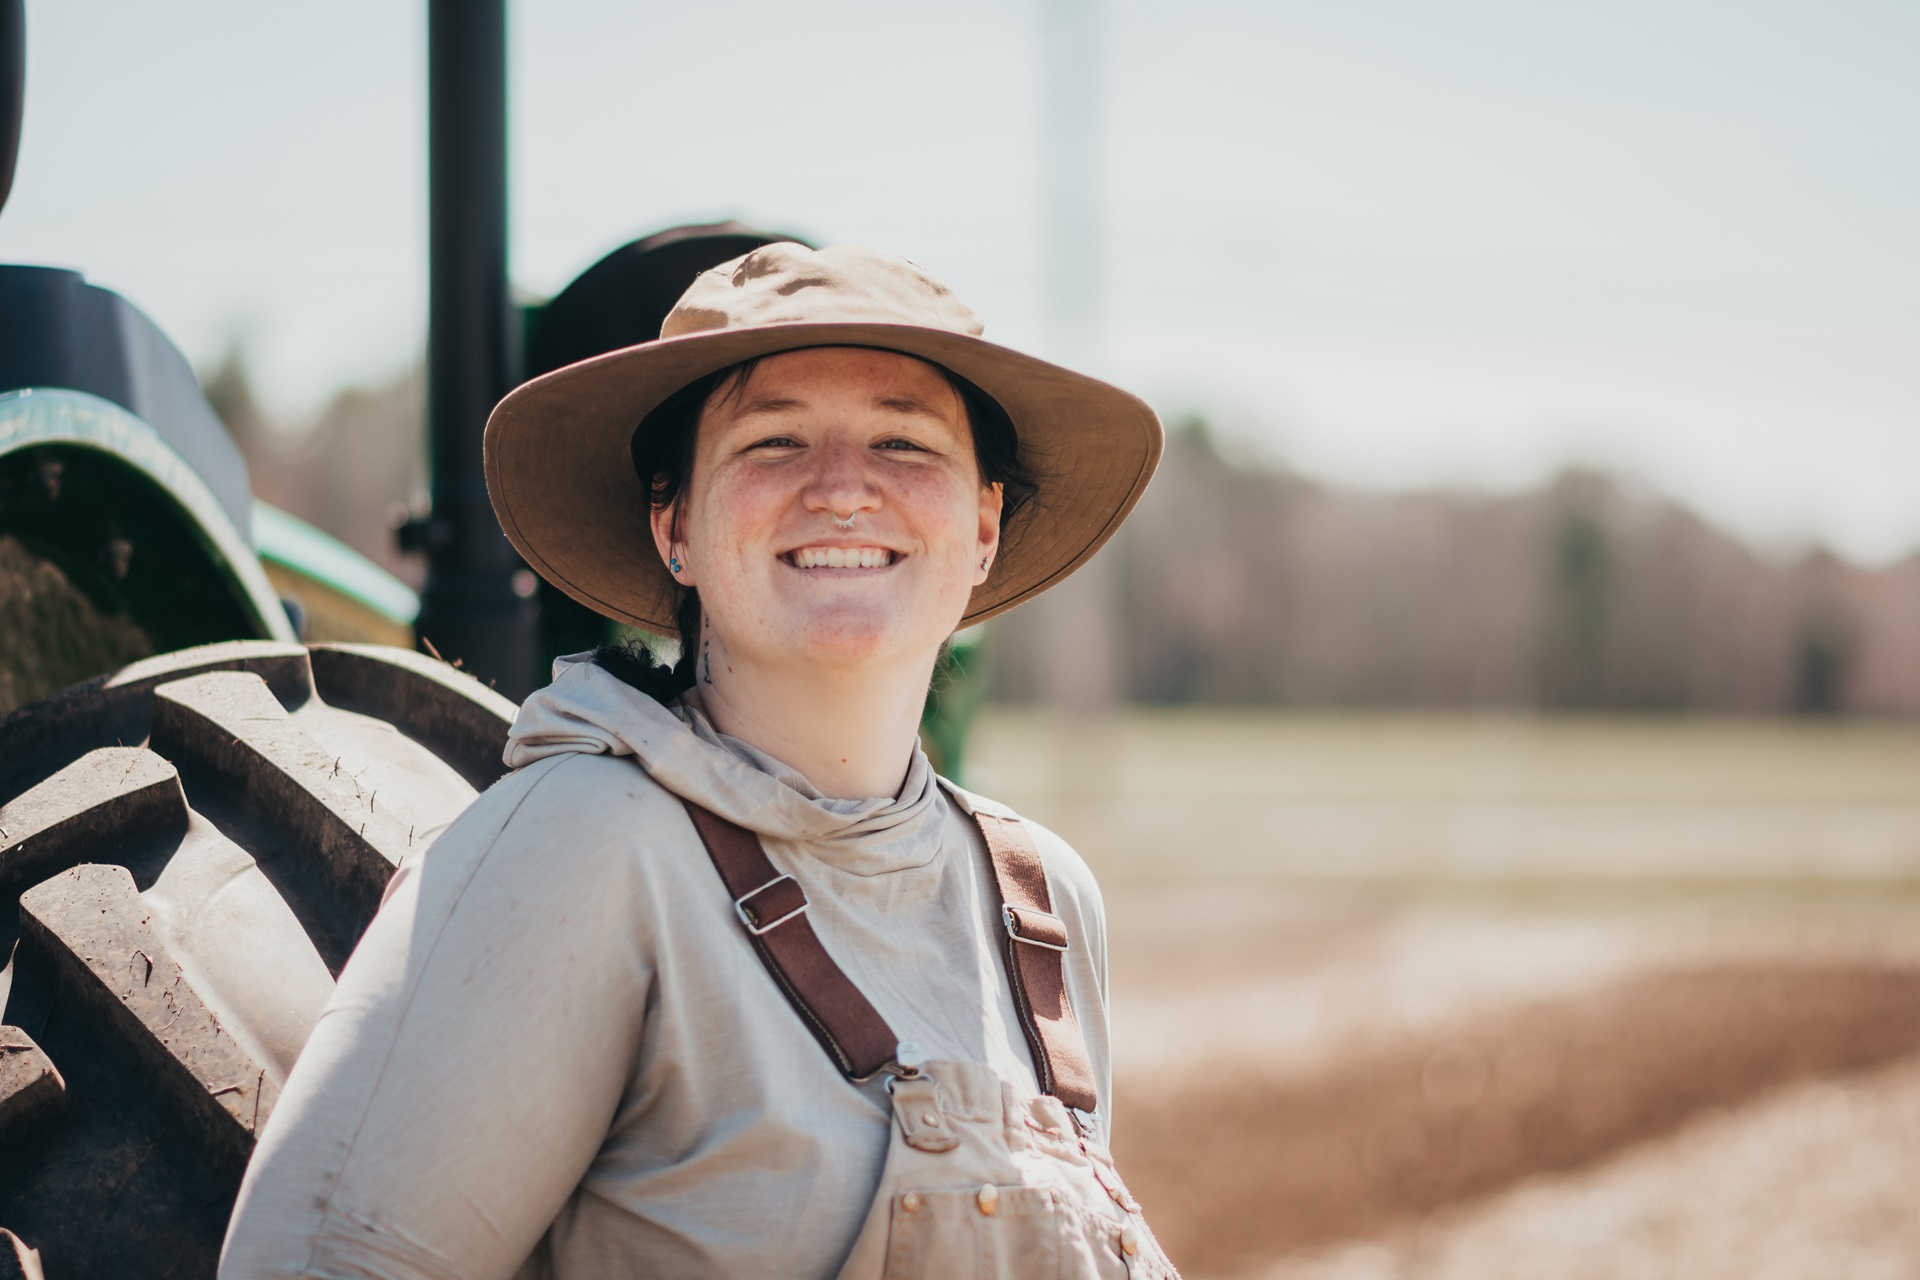 A smiling Sofia Koso, Farm Manager at Moose Hill, stands in front of a tractor in a field.